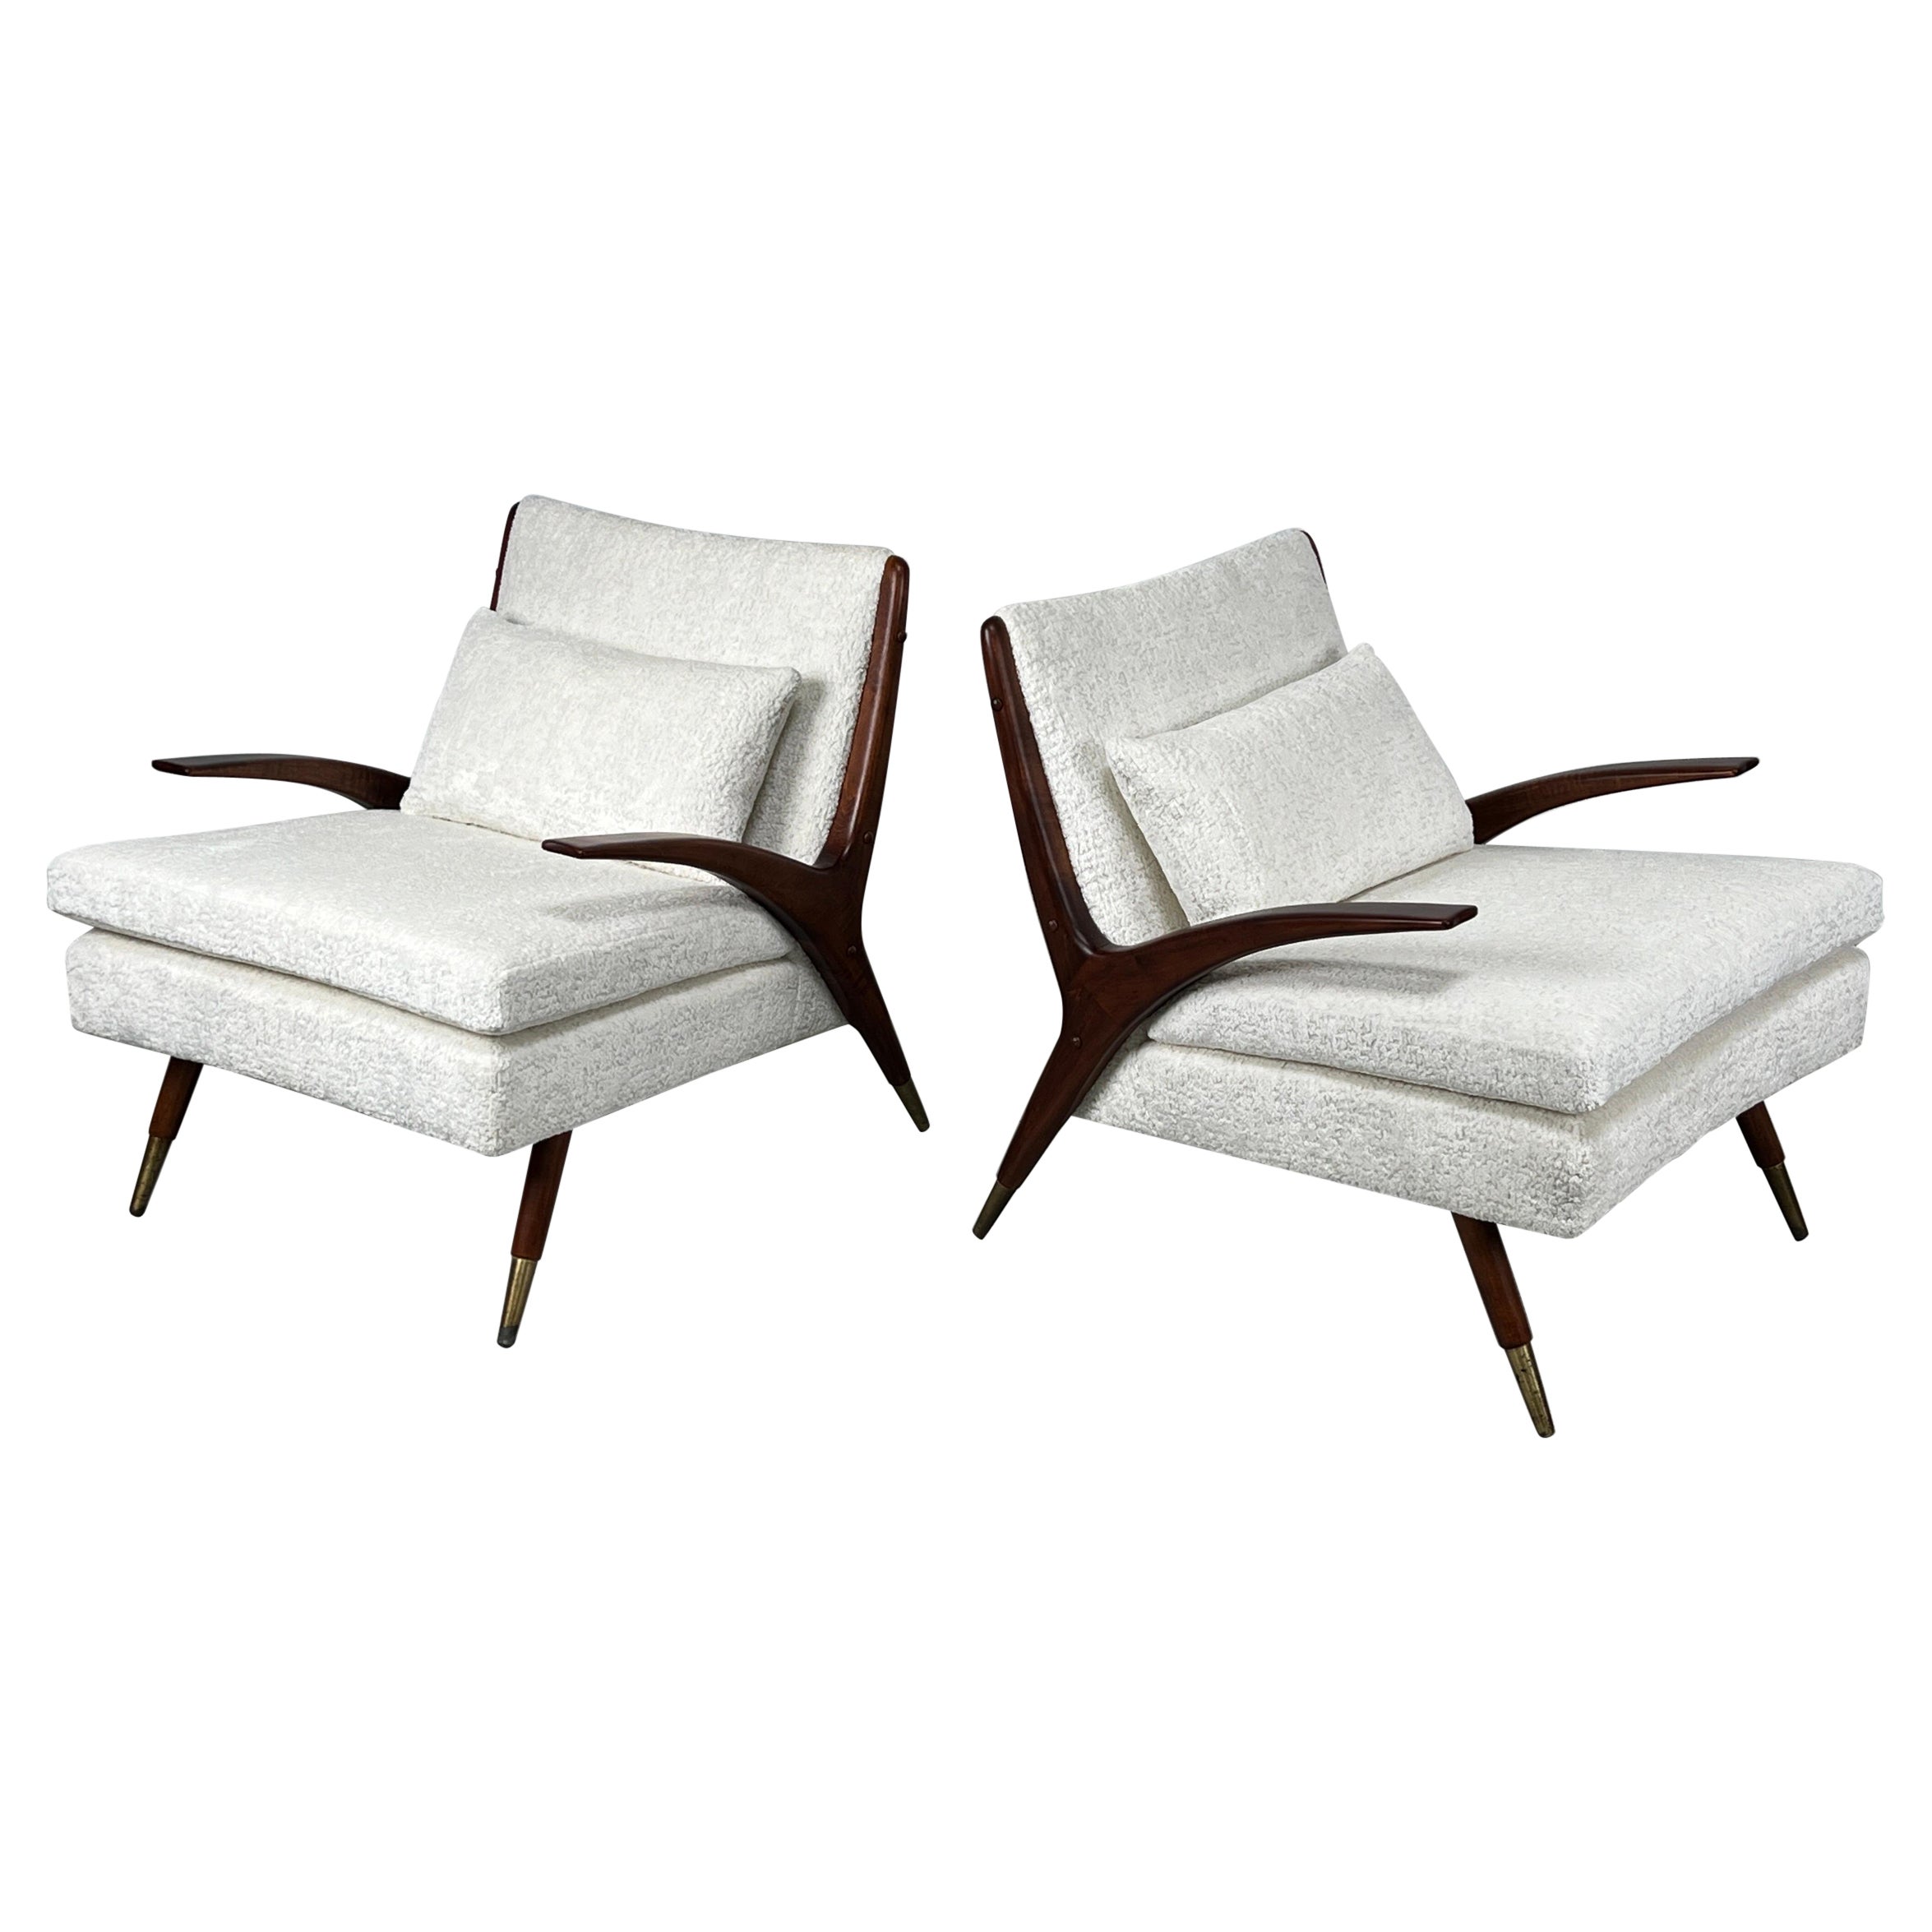 Pair of Lounge Chairs by Karpen of California